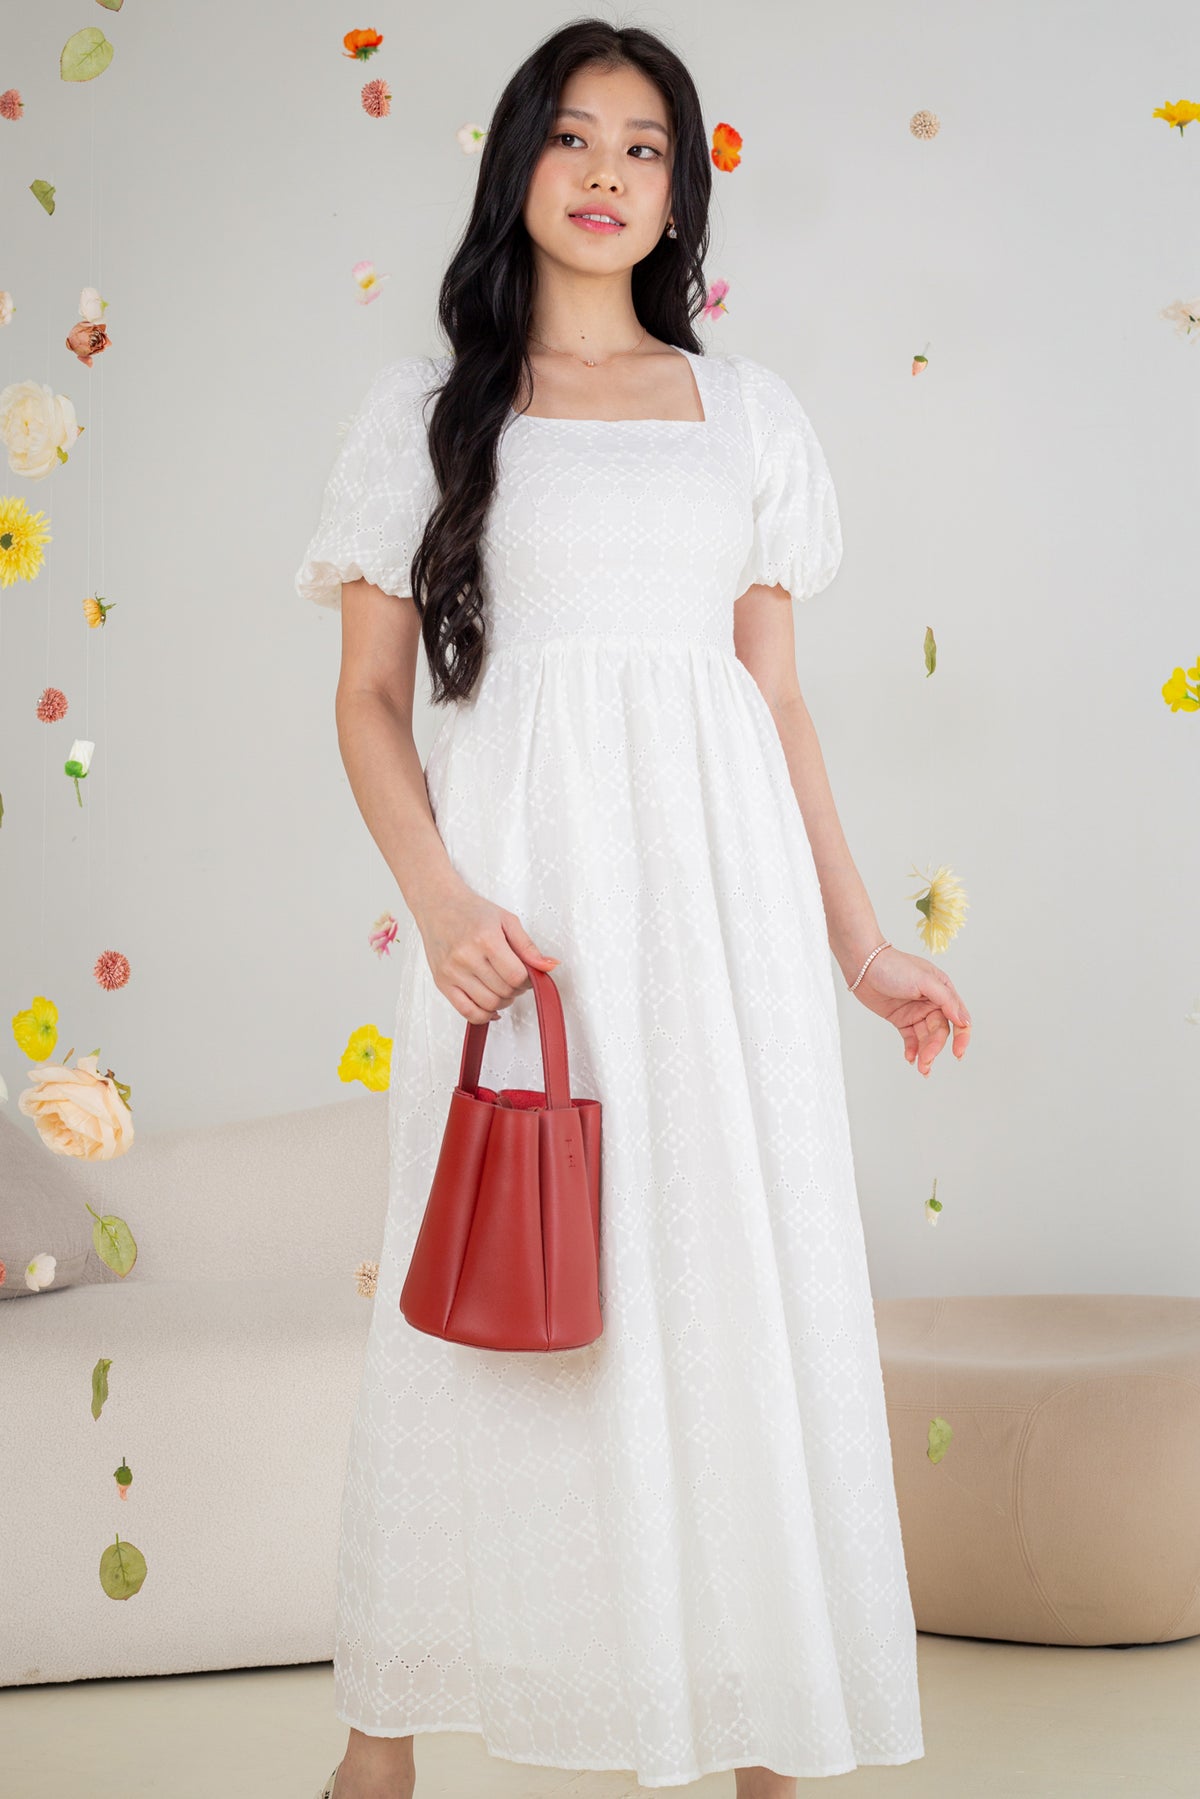 Eyelet Embroidery Shoelace Dress in White